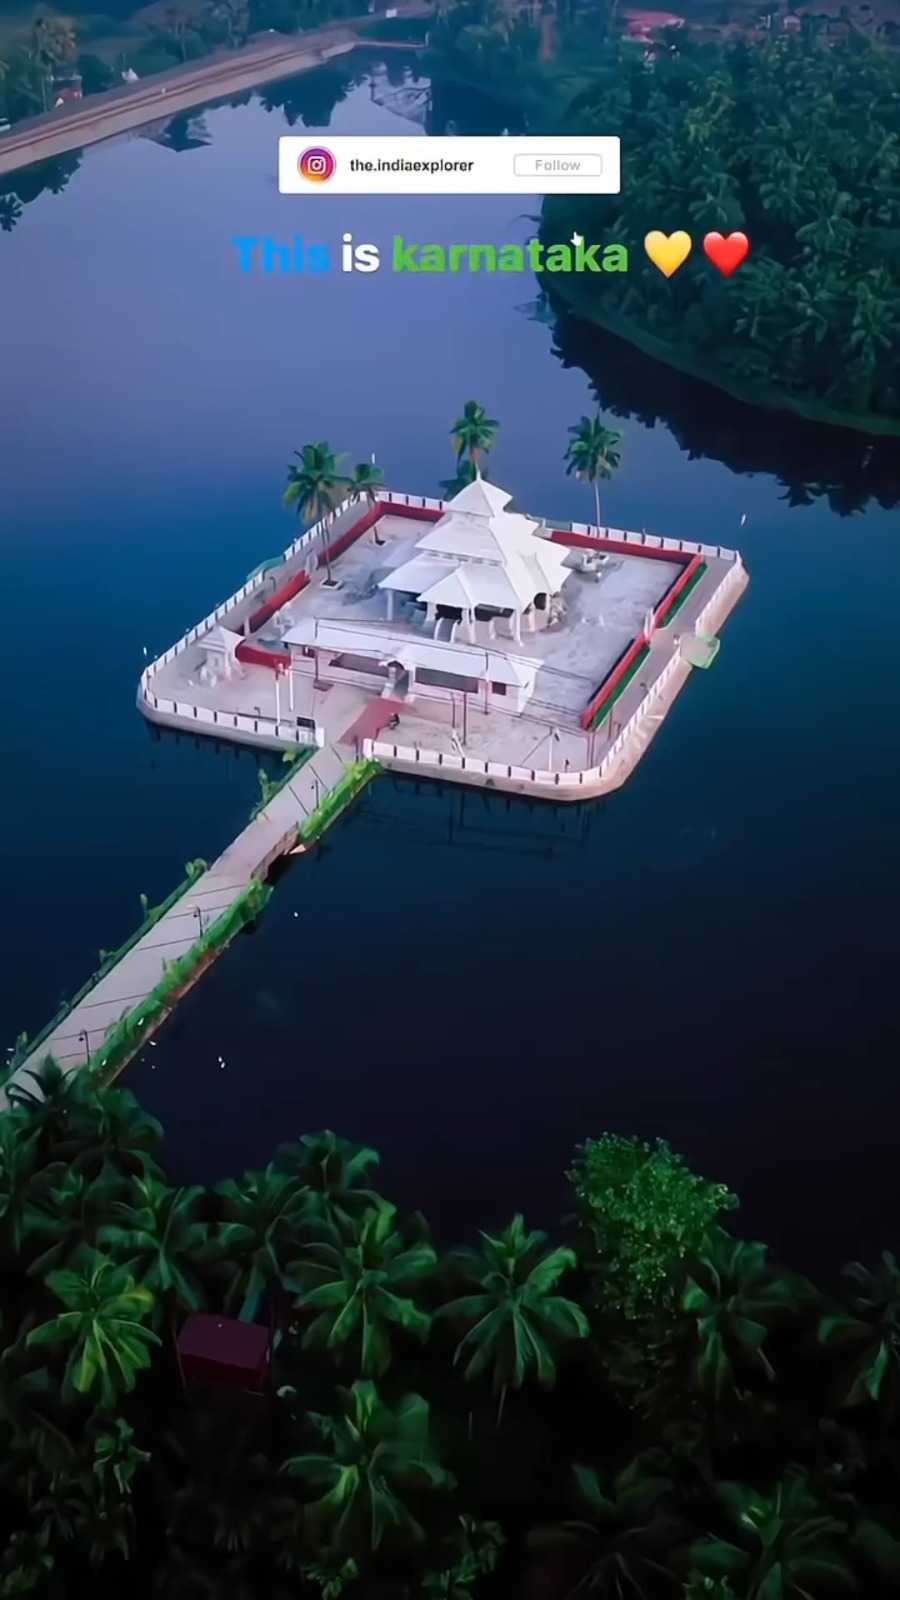 Shri Ankere Chaturmukha Basadi Shri Ankere Chaturmukha Basadi is a beautiful temple in Karnataka’s Karkala. Situated in the middle of the Ankere Lake, it is located on paddy fields and coconut plantations.